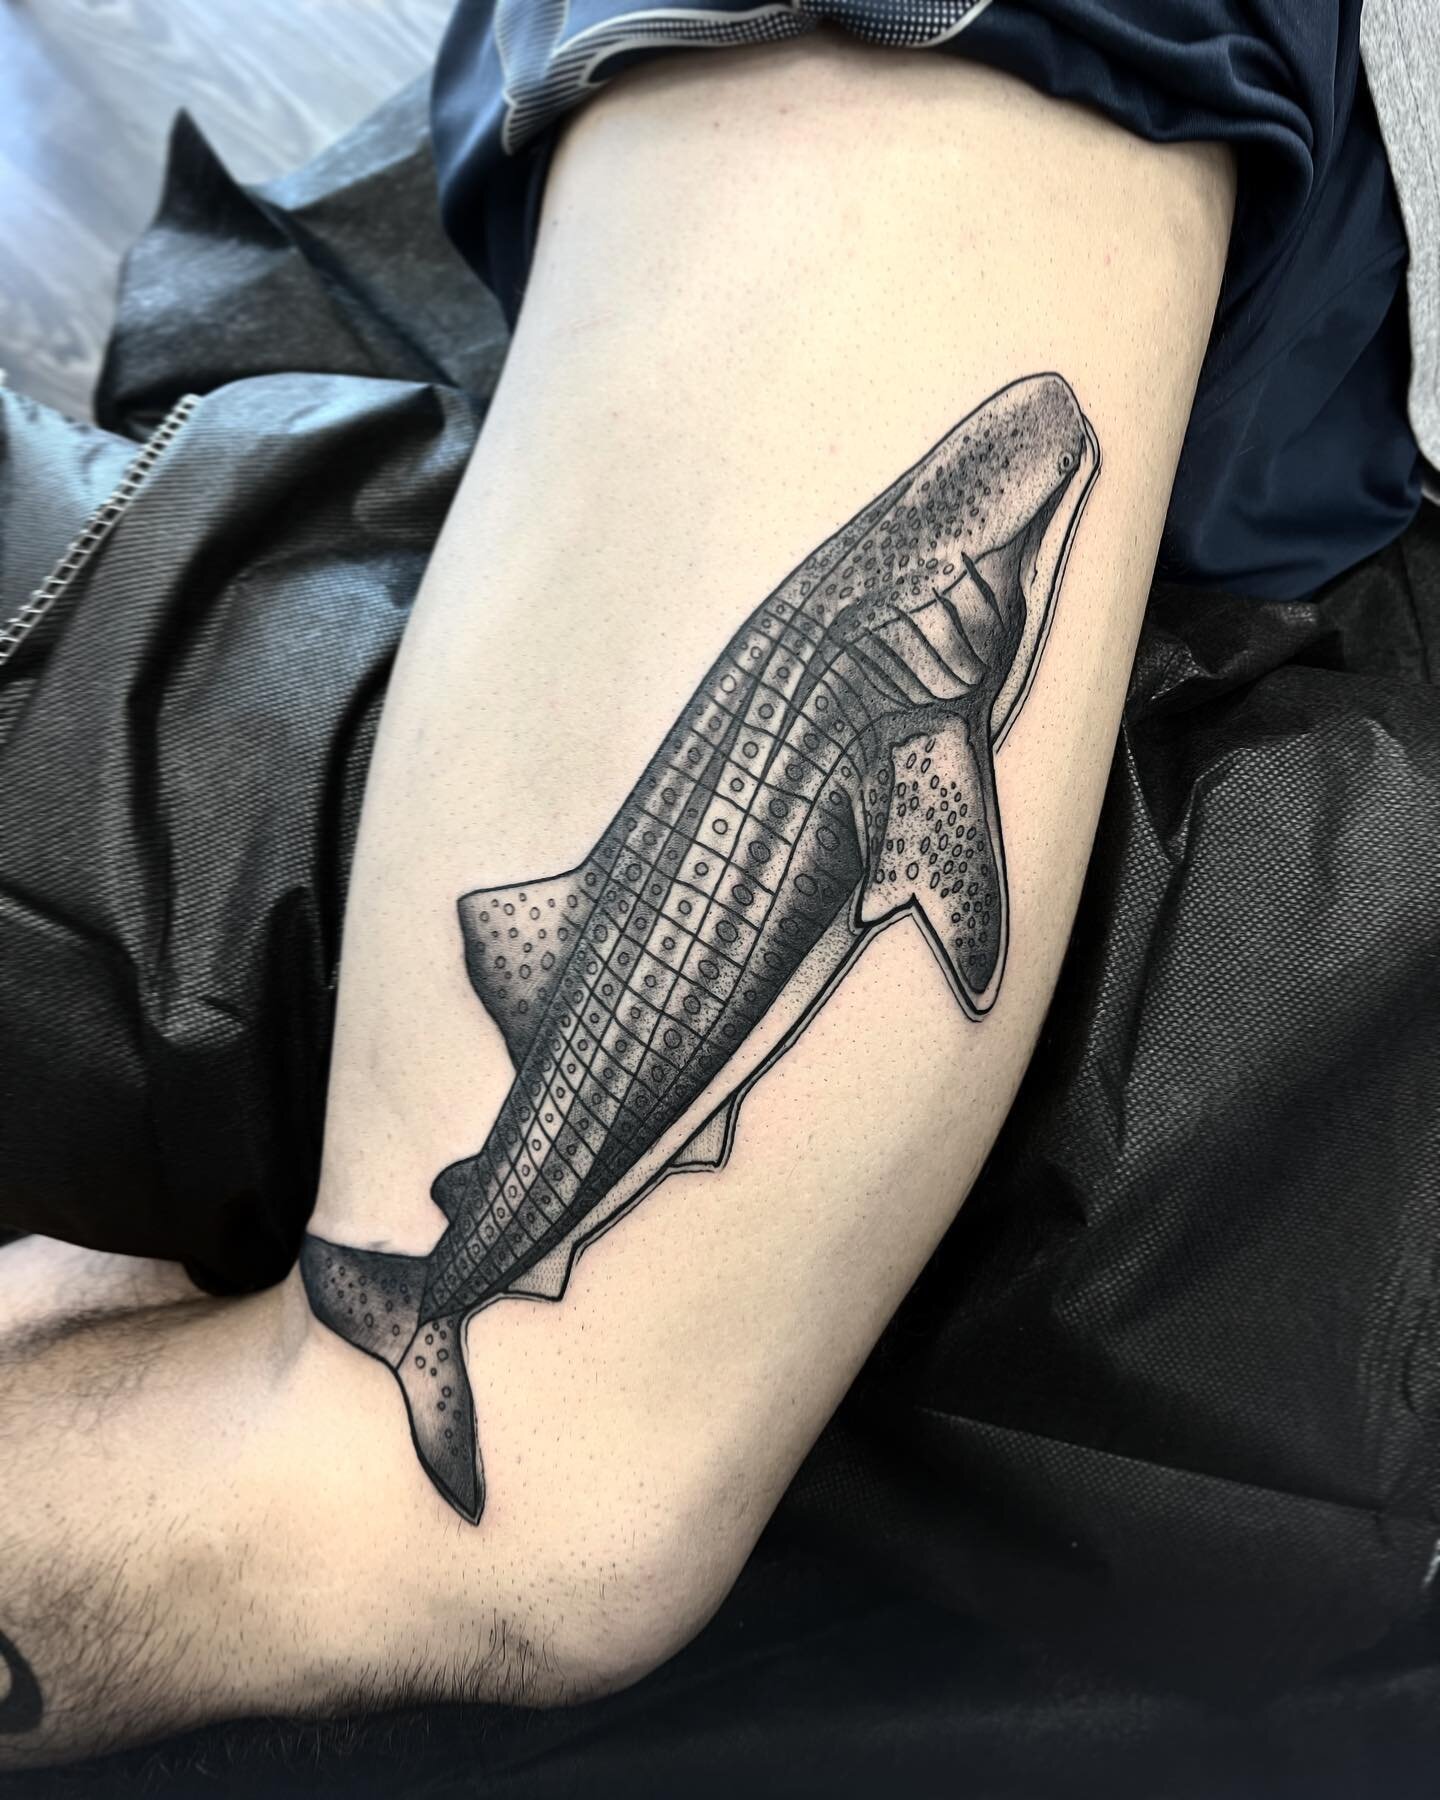 Whale shark on the side of a thigh! ✌🏻

DMTATTOOS.COM

#shark #sharktattoo #blackwork #blackworktattoo #blackworktattoos #rebelmusetattoo #dallastattooartist